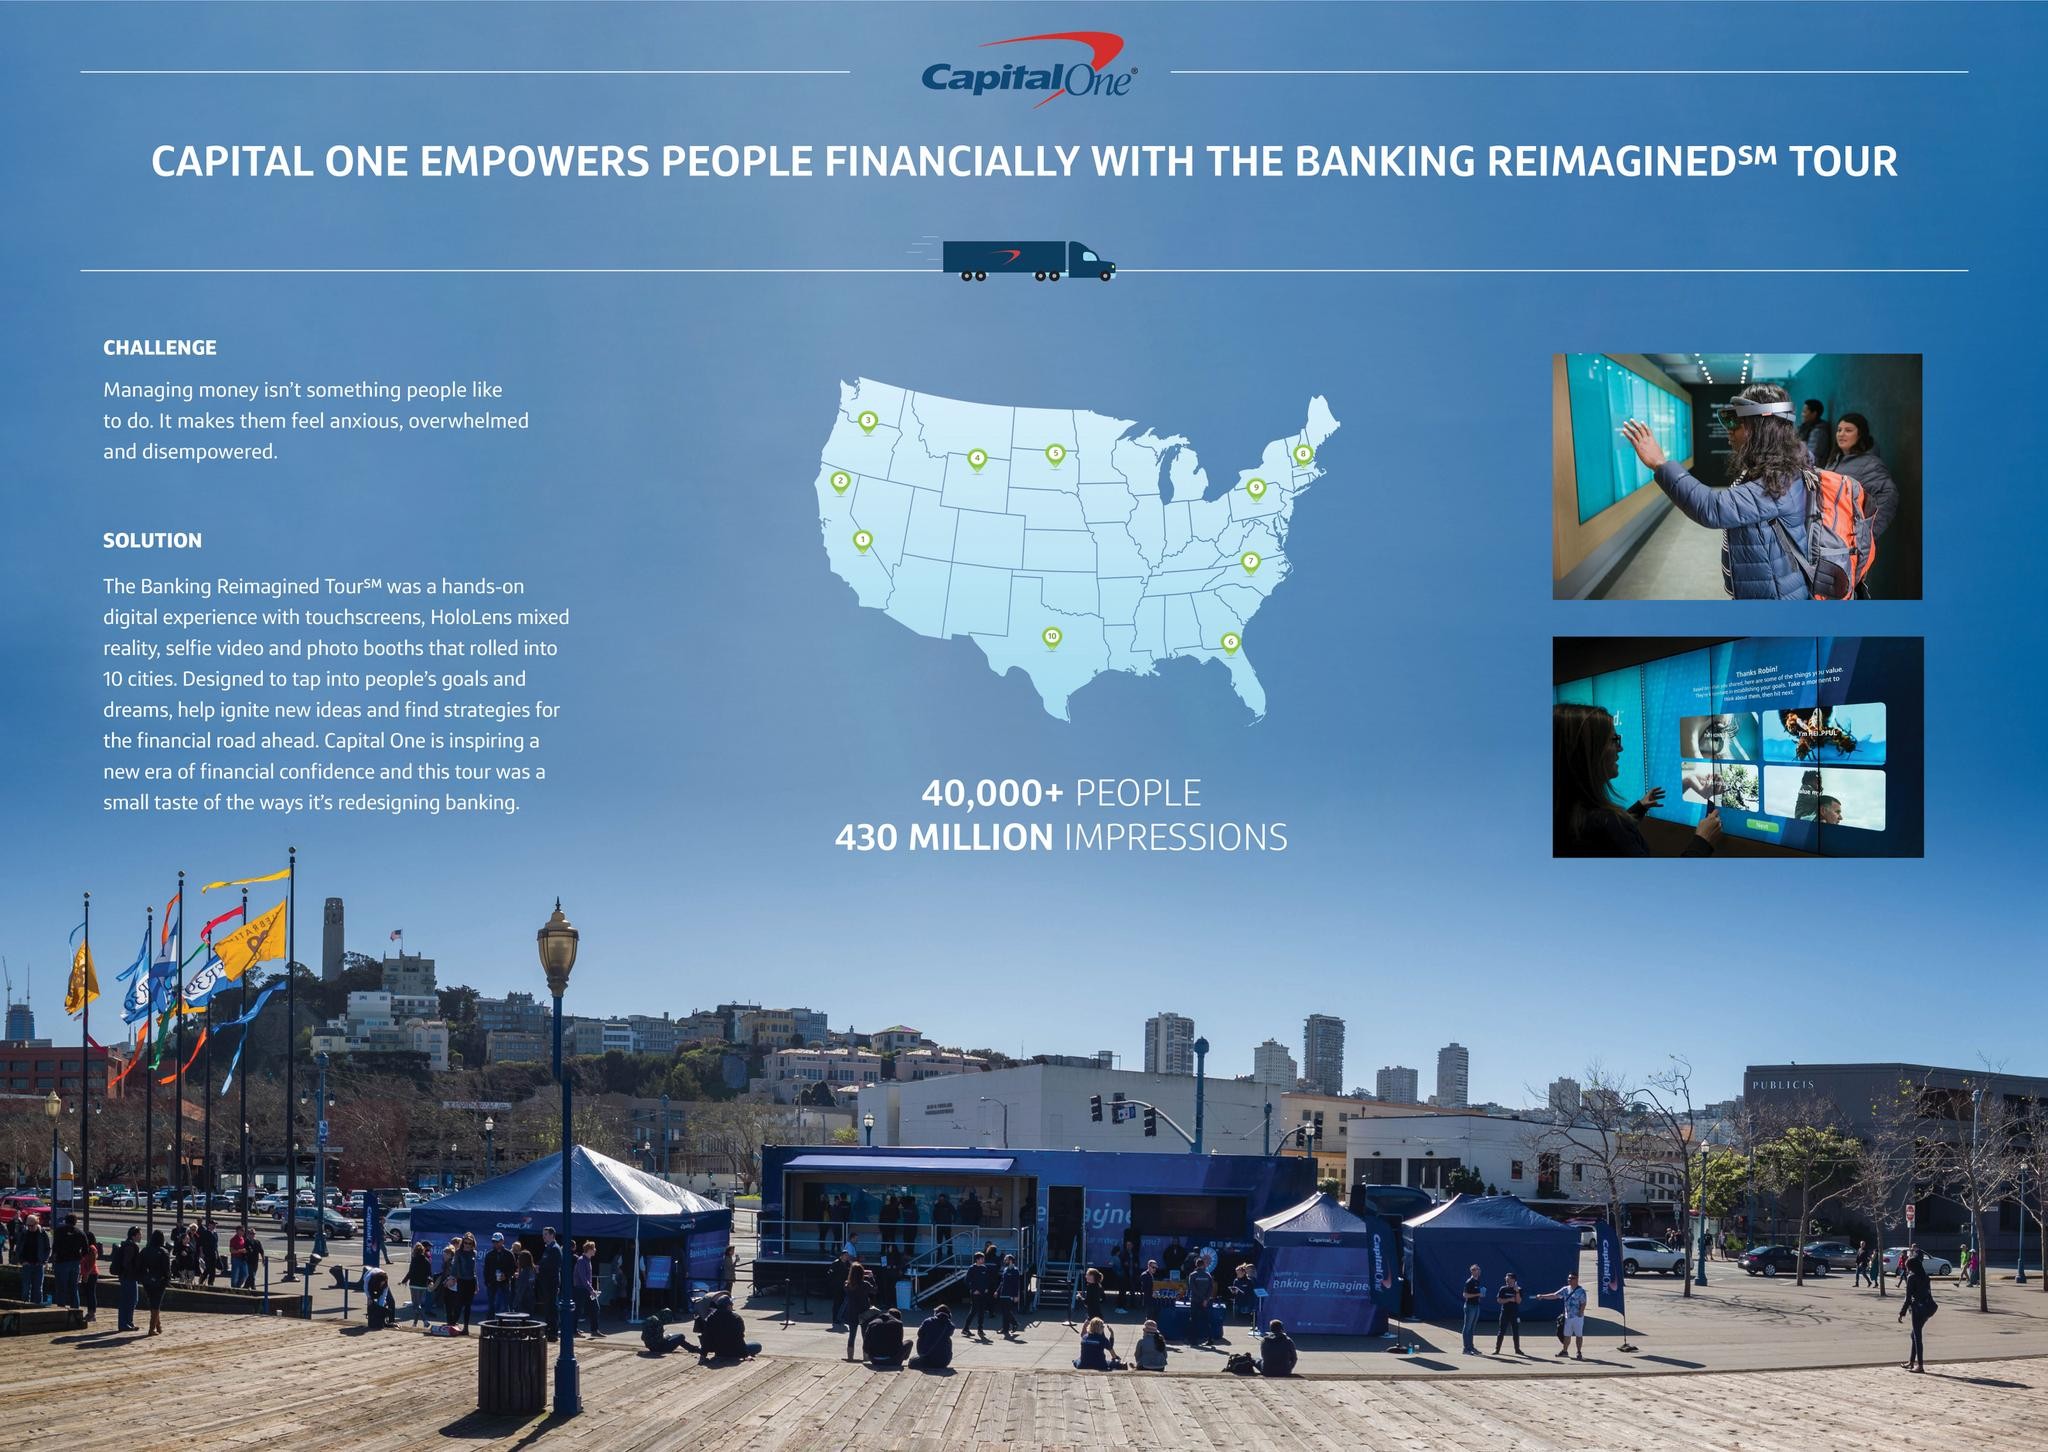 CAPITAL ONE BANKING REIMAGINED TOUR 